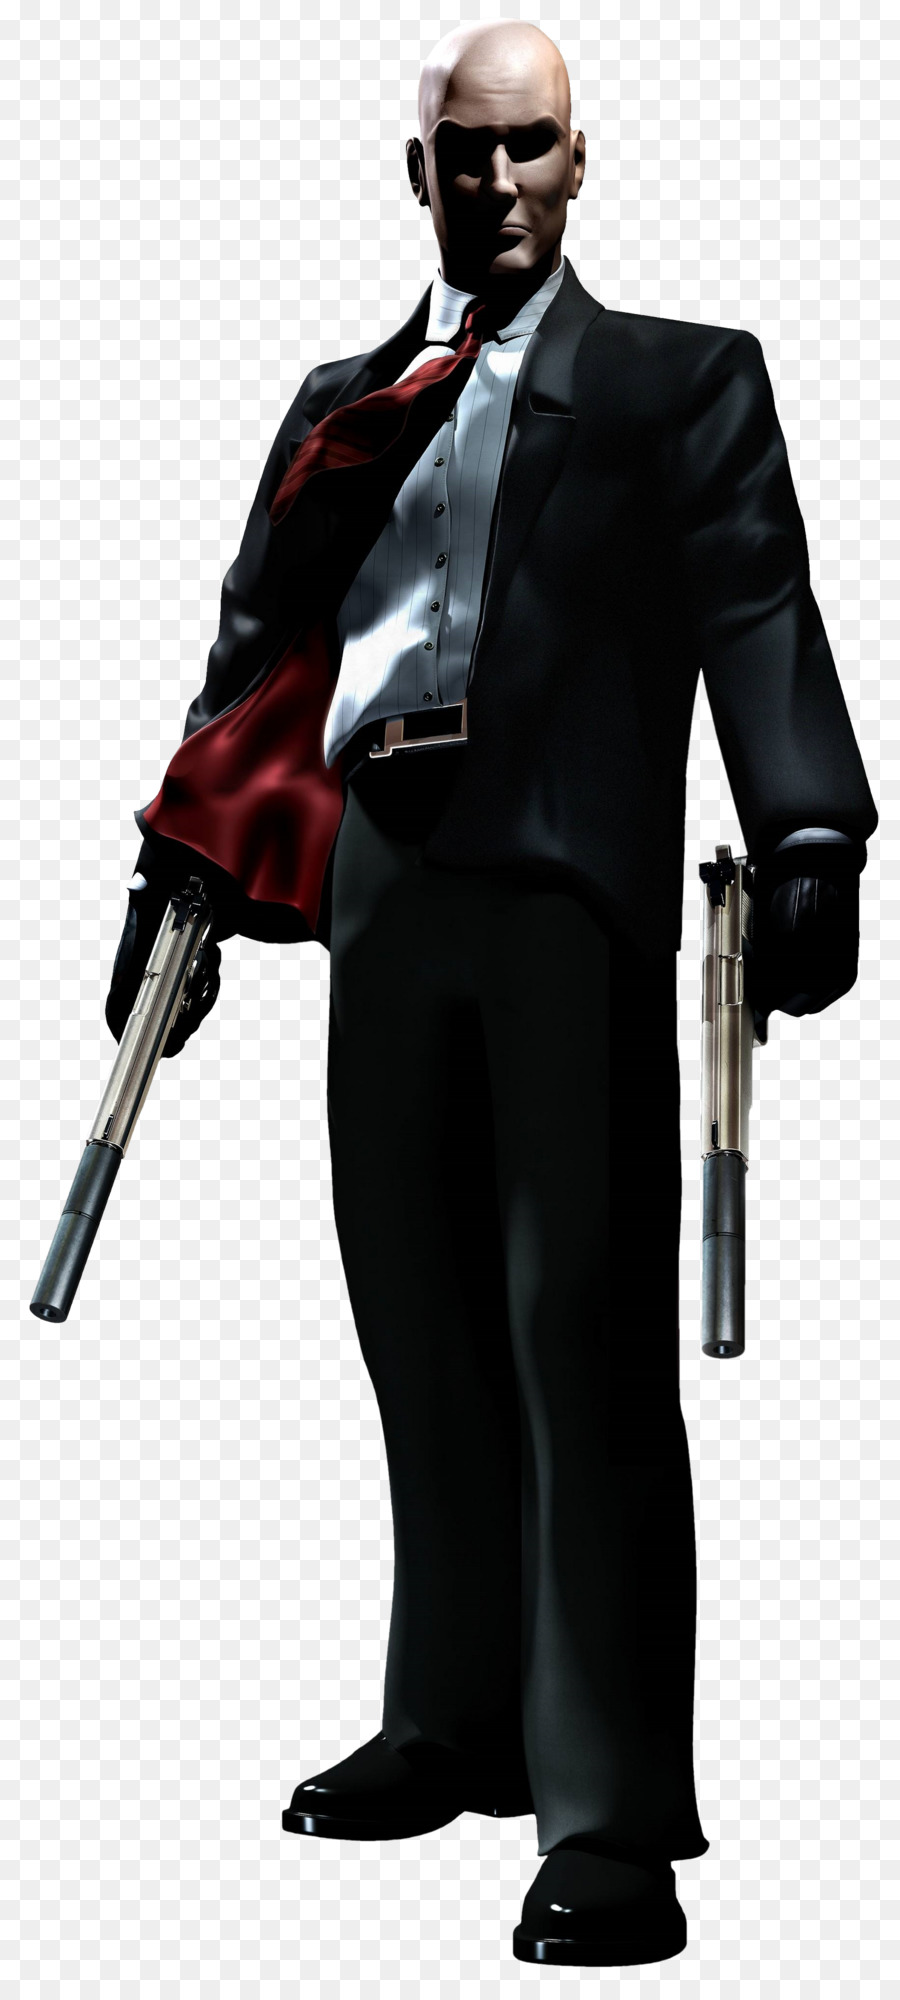 Hitman 2: Silent Assassin Hitman: Codename 47 Hitman: Contracts Agent 47 PlayStation 2 - agent 47 png download - 1516*3342 - Free Transparent Hitman 2 Silent Assassin png Download.